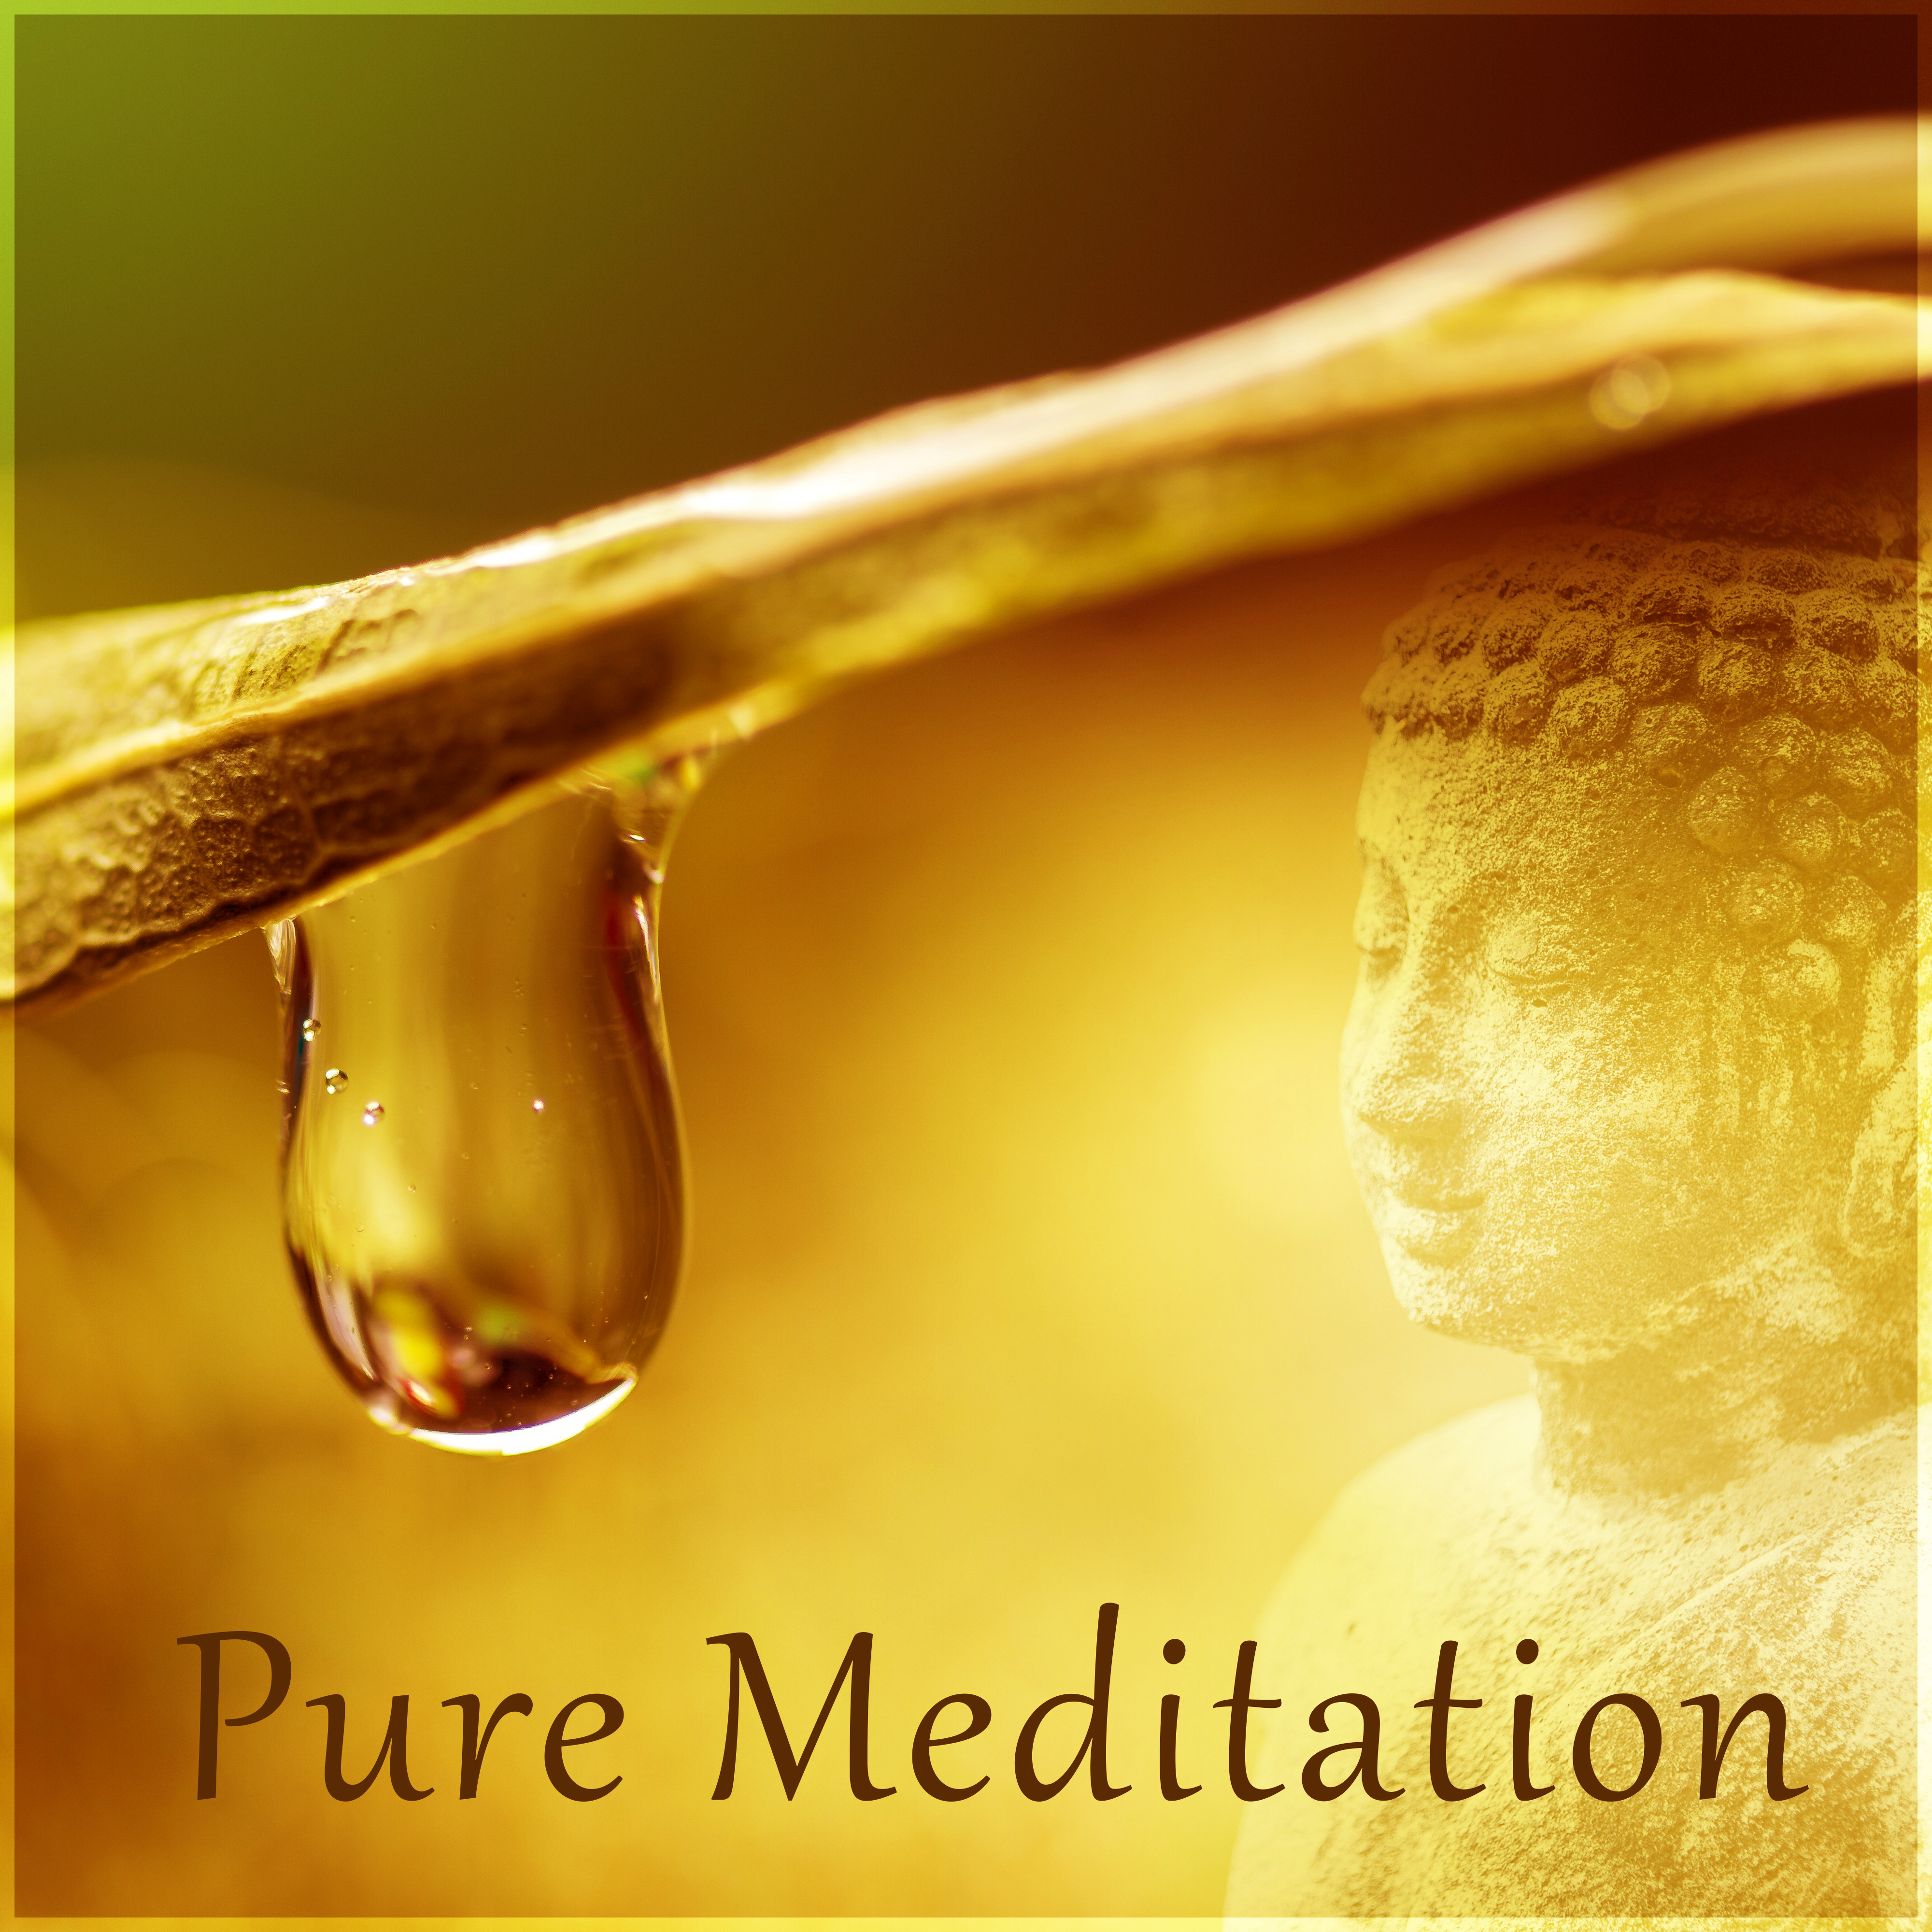 Pure Meditation - Music for Stress Relief, Study, Healing Reiki Music, Yoga, Deep Massage, Relaxation,